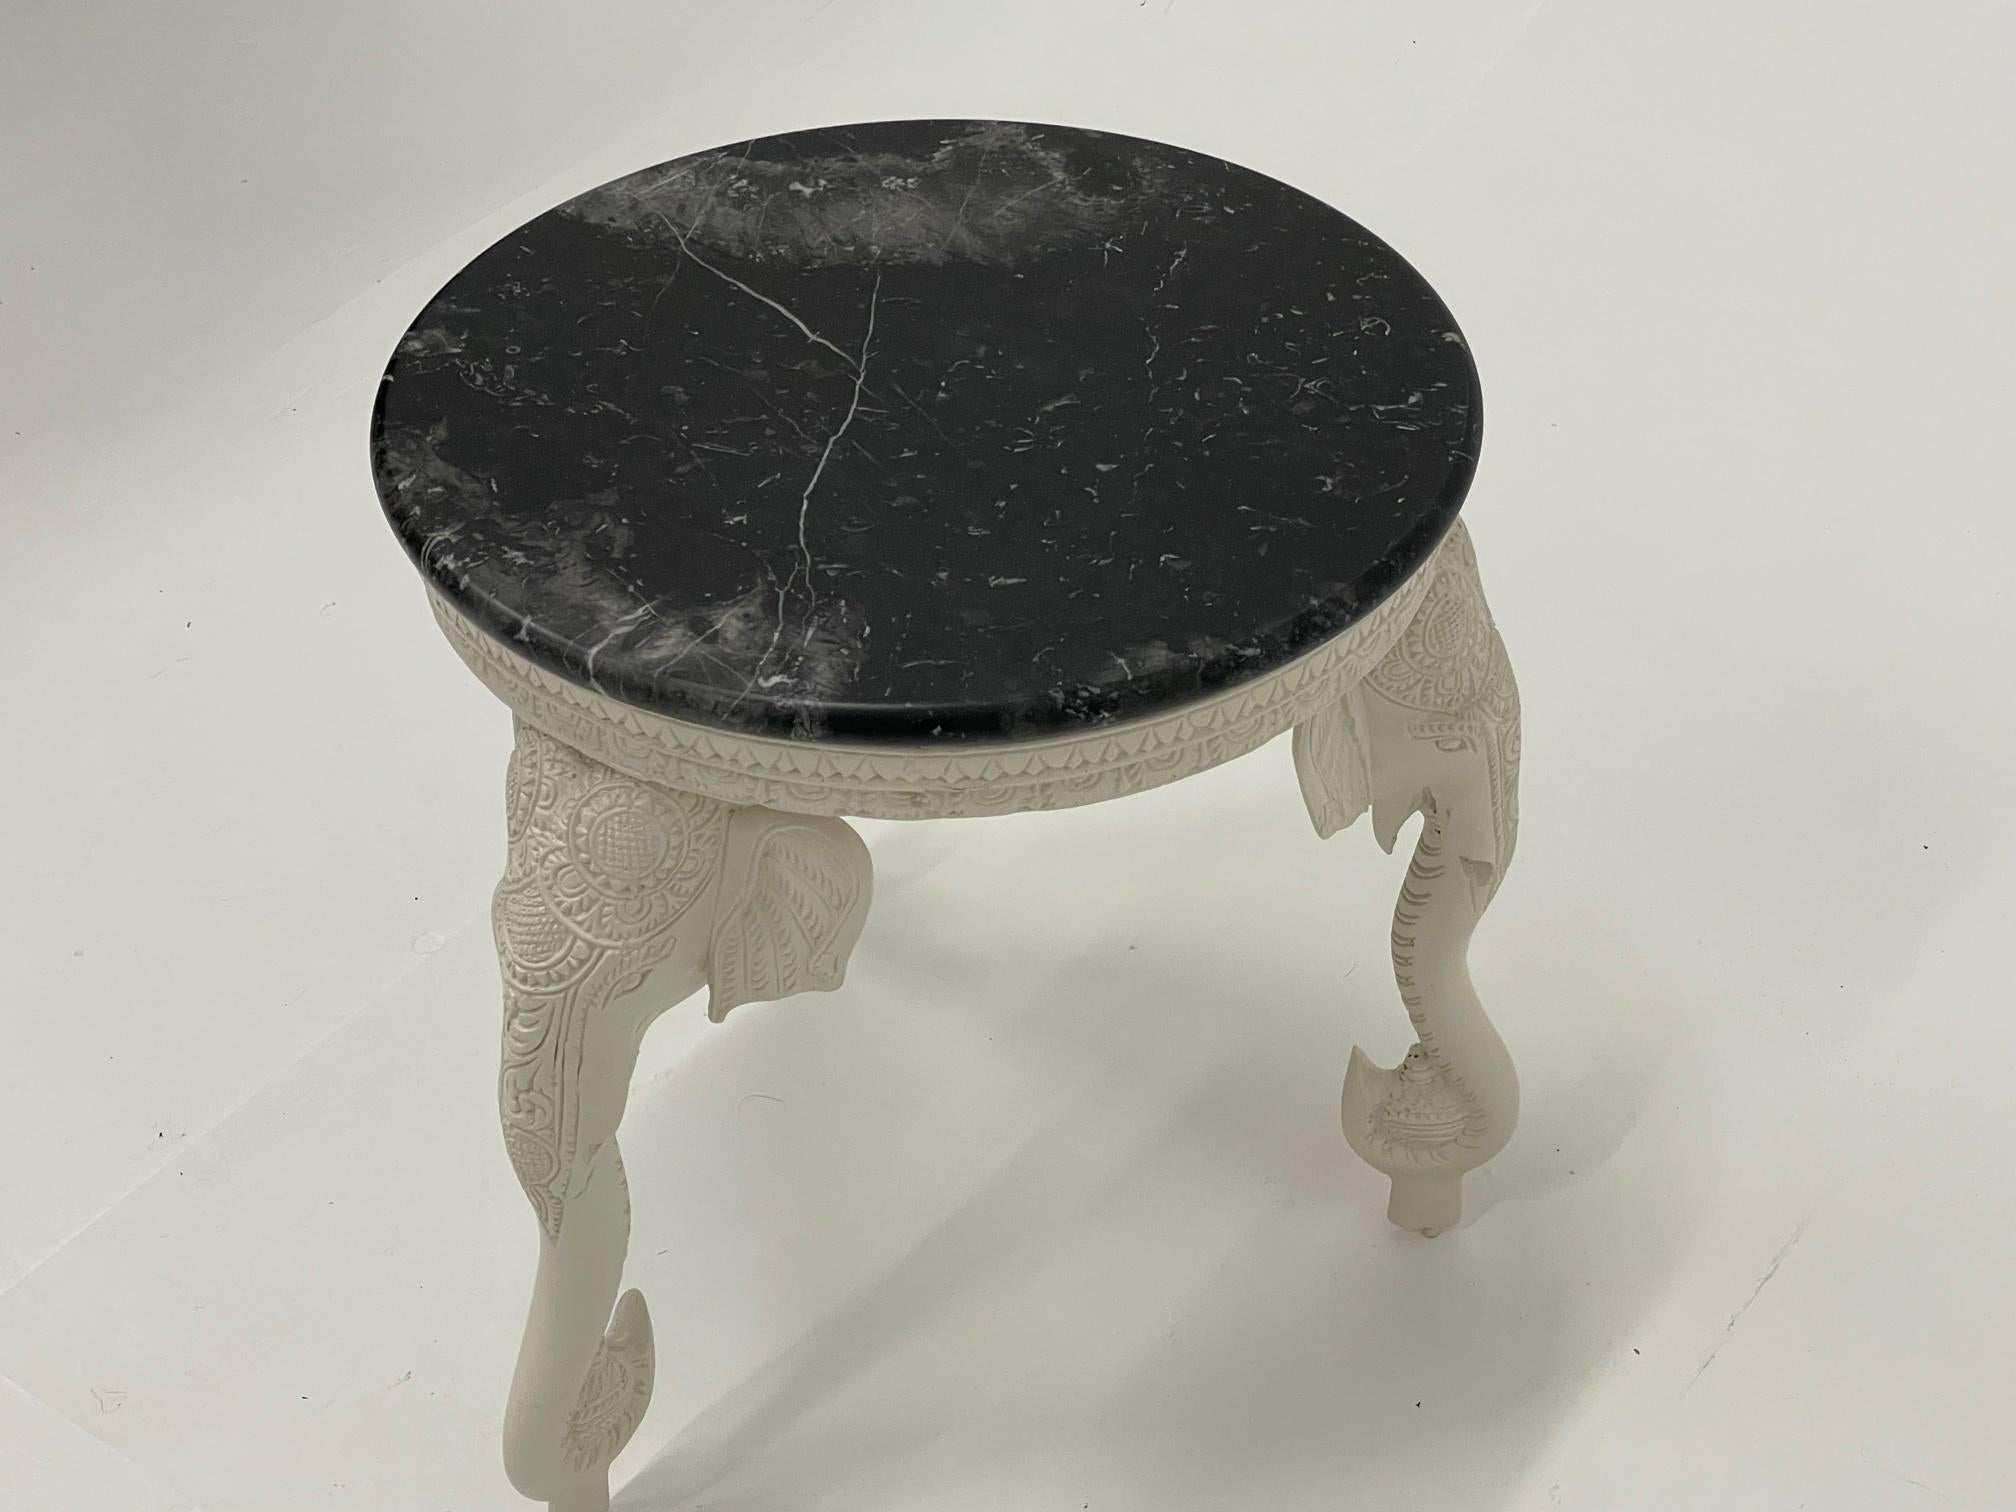 Glamorous Cream Colored Cast Resin Elephant Motife Round Table with Marble Top 1